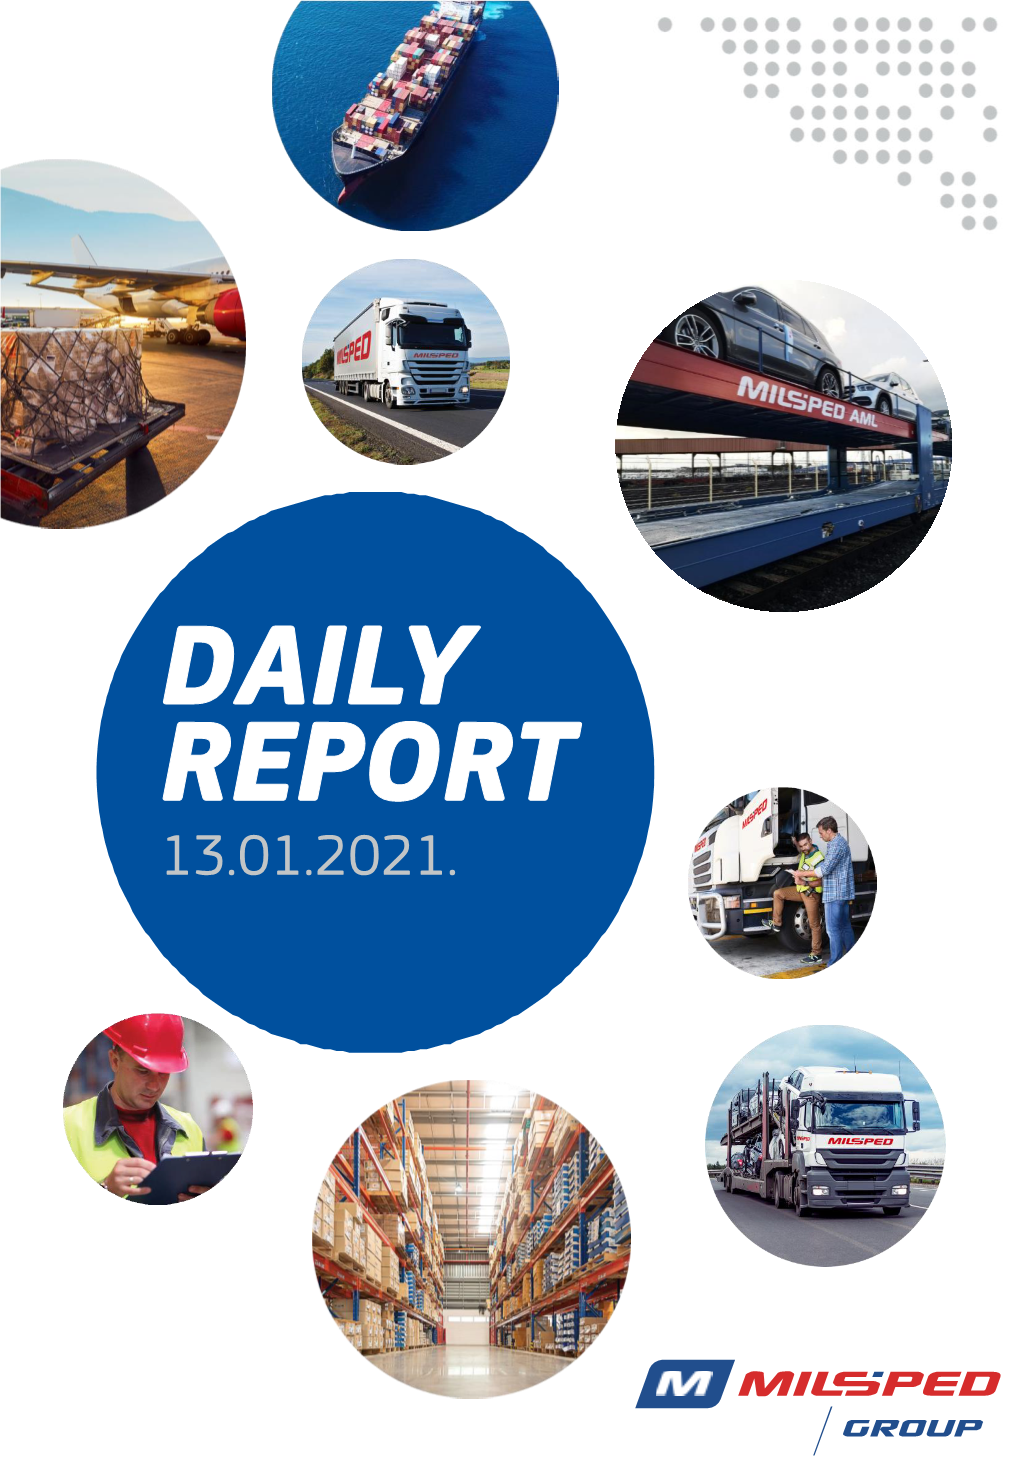 Daily Report 13.01.2021